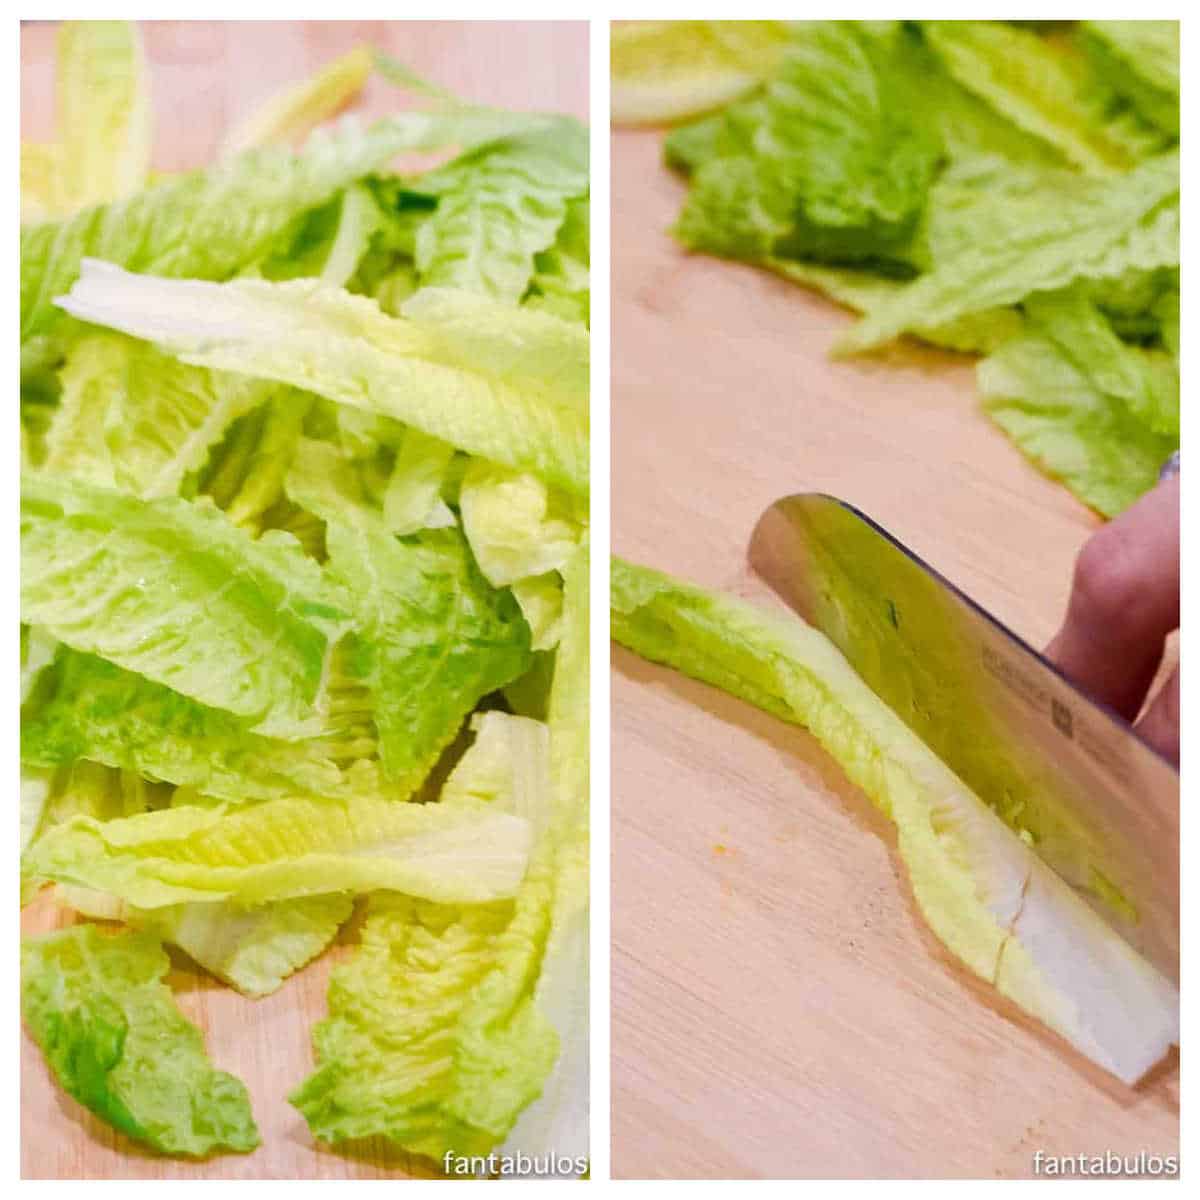 Two image collage of cutting romaine lettuce.